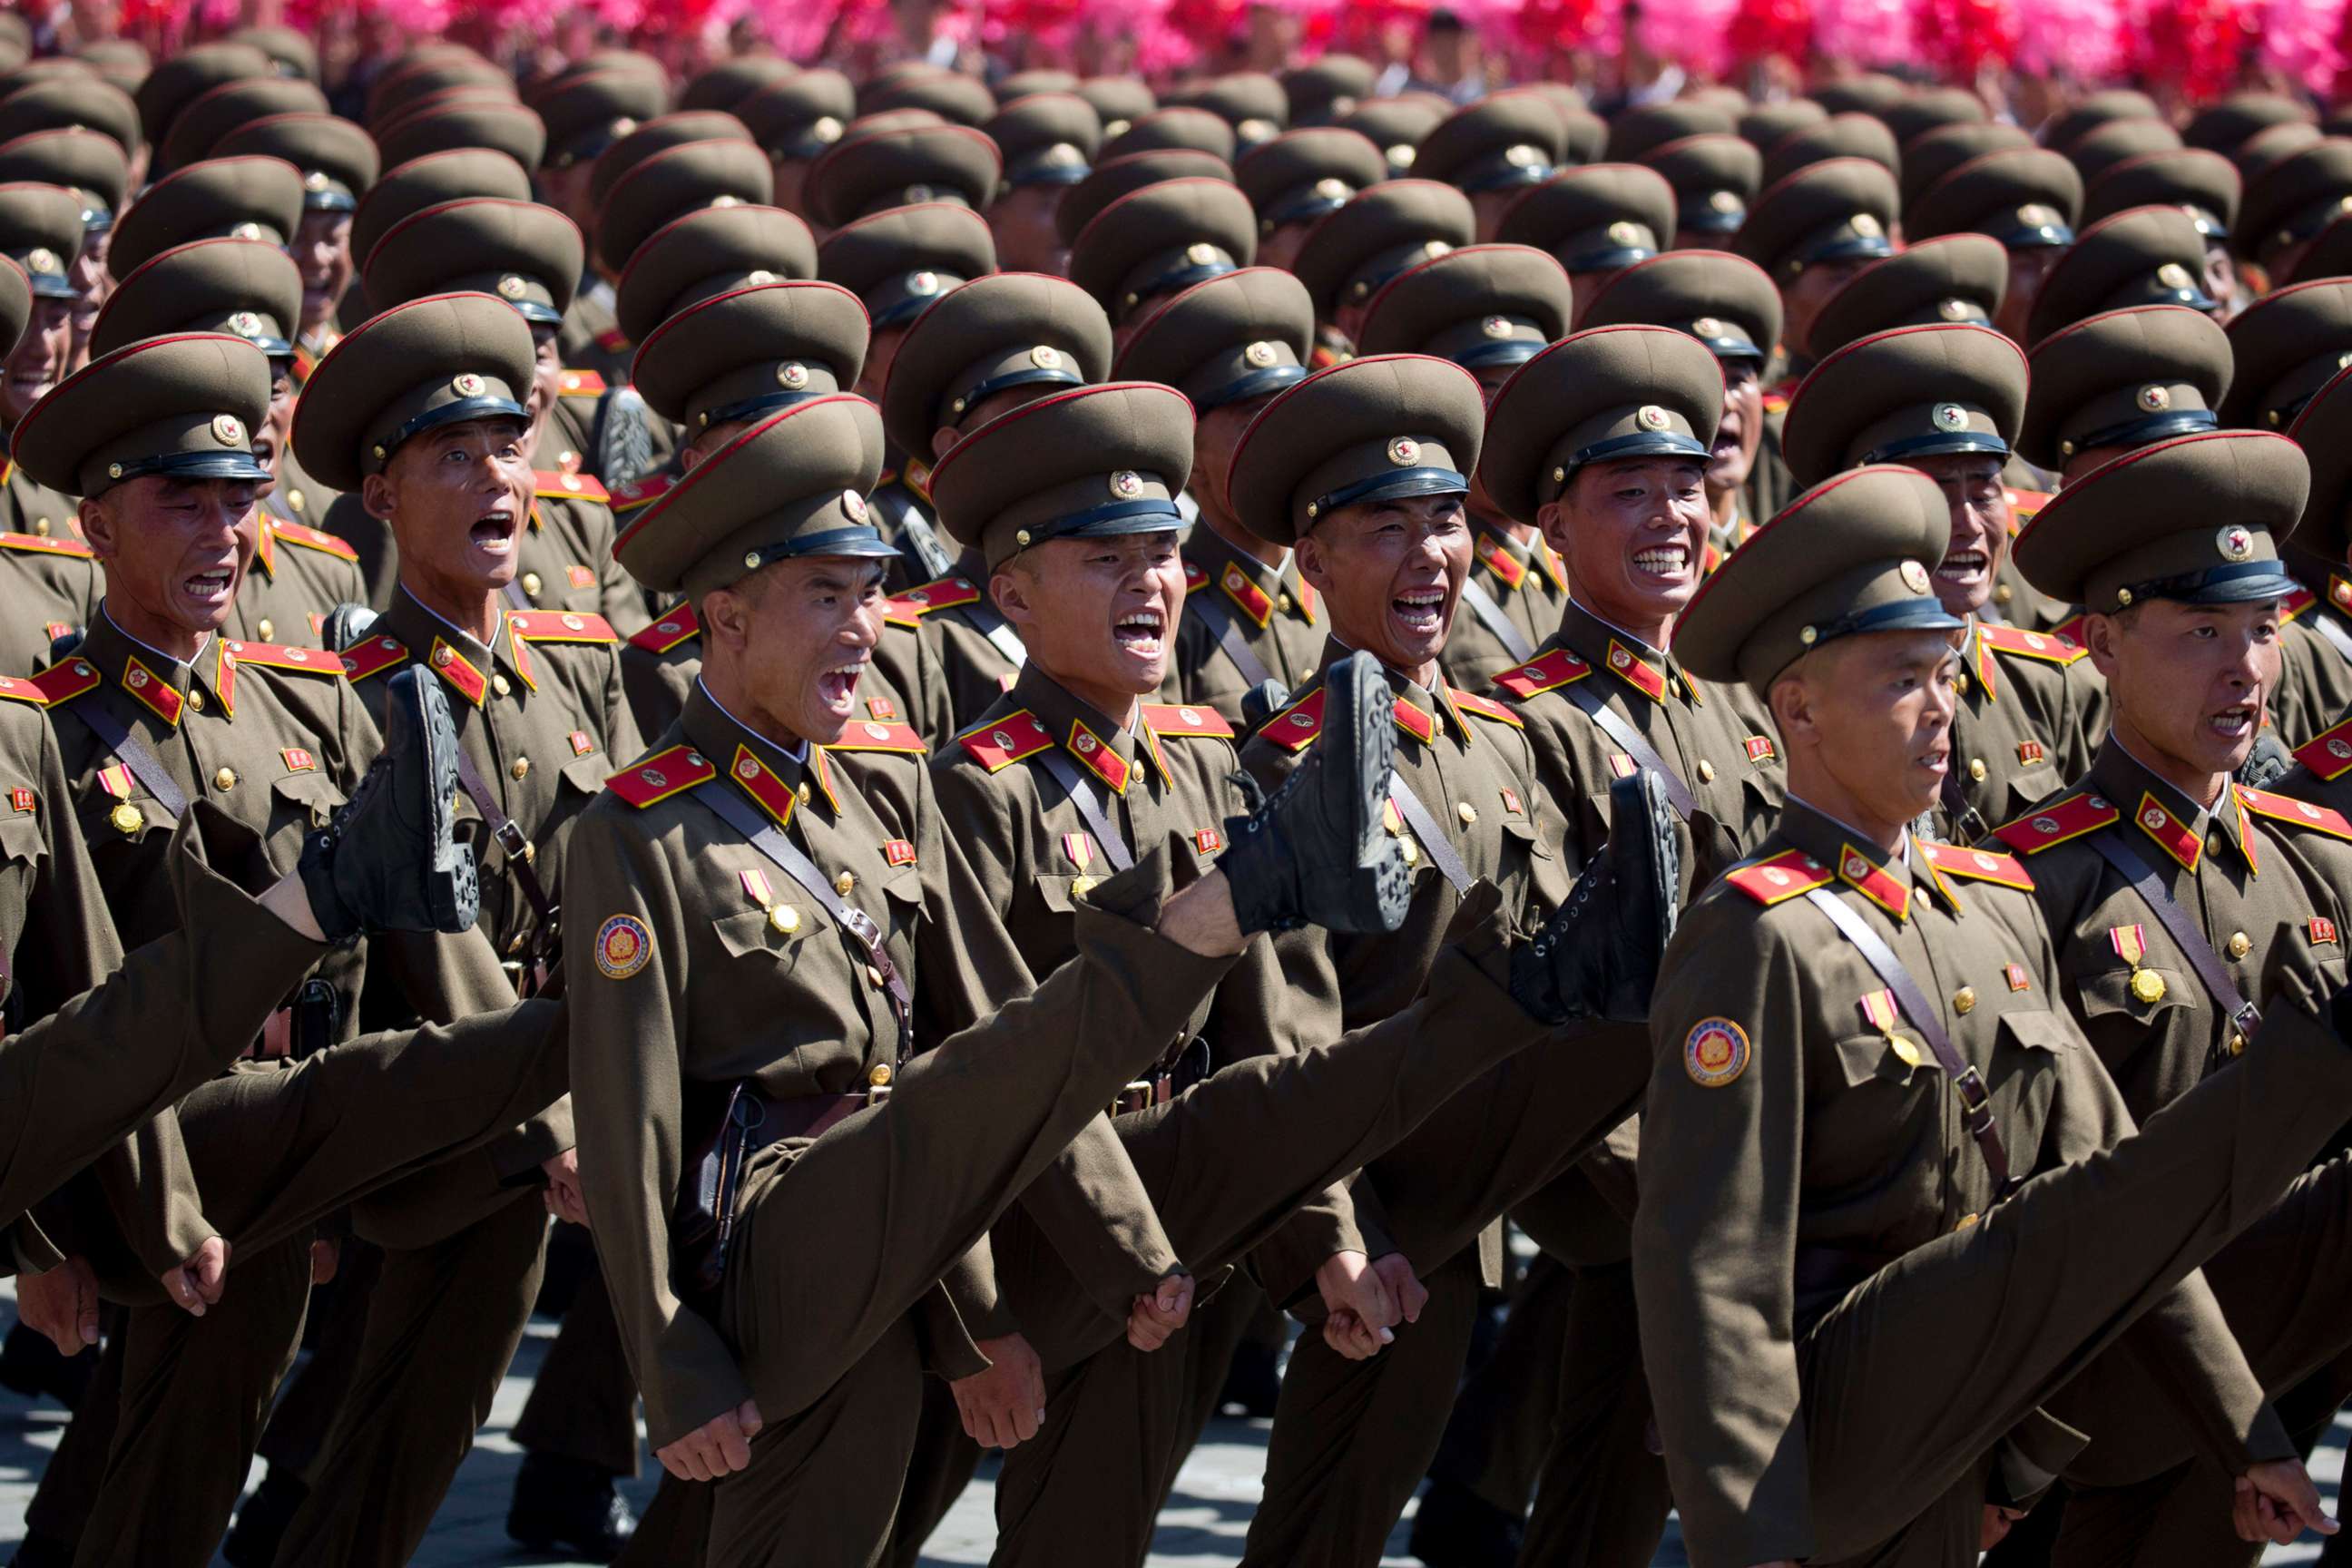 PHOTO: Soldiers march in a parade for the 70th anniversary of North Korea's founding day in Pyongyang, North Korea, Sept. 9, 2018.